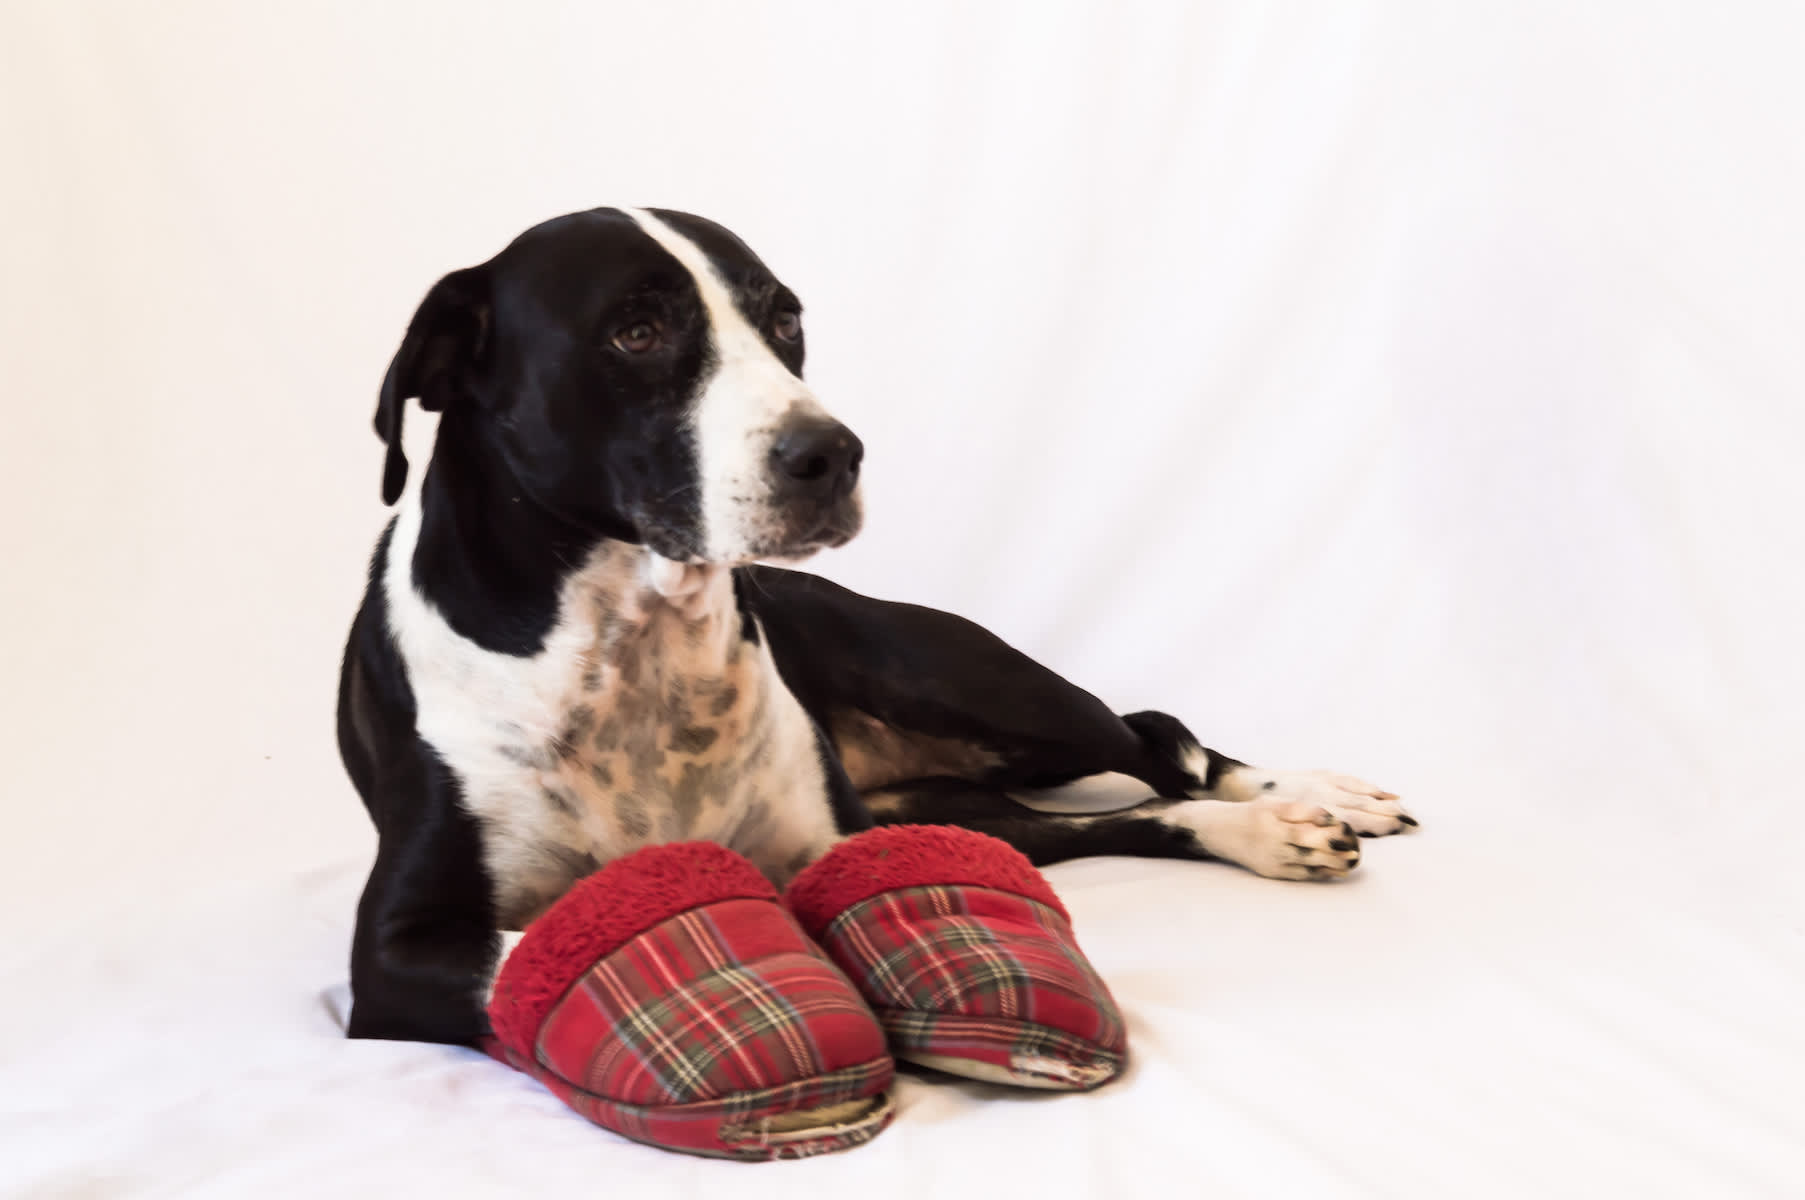 Canva - Black and White Dog Keeping Slippers Warm